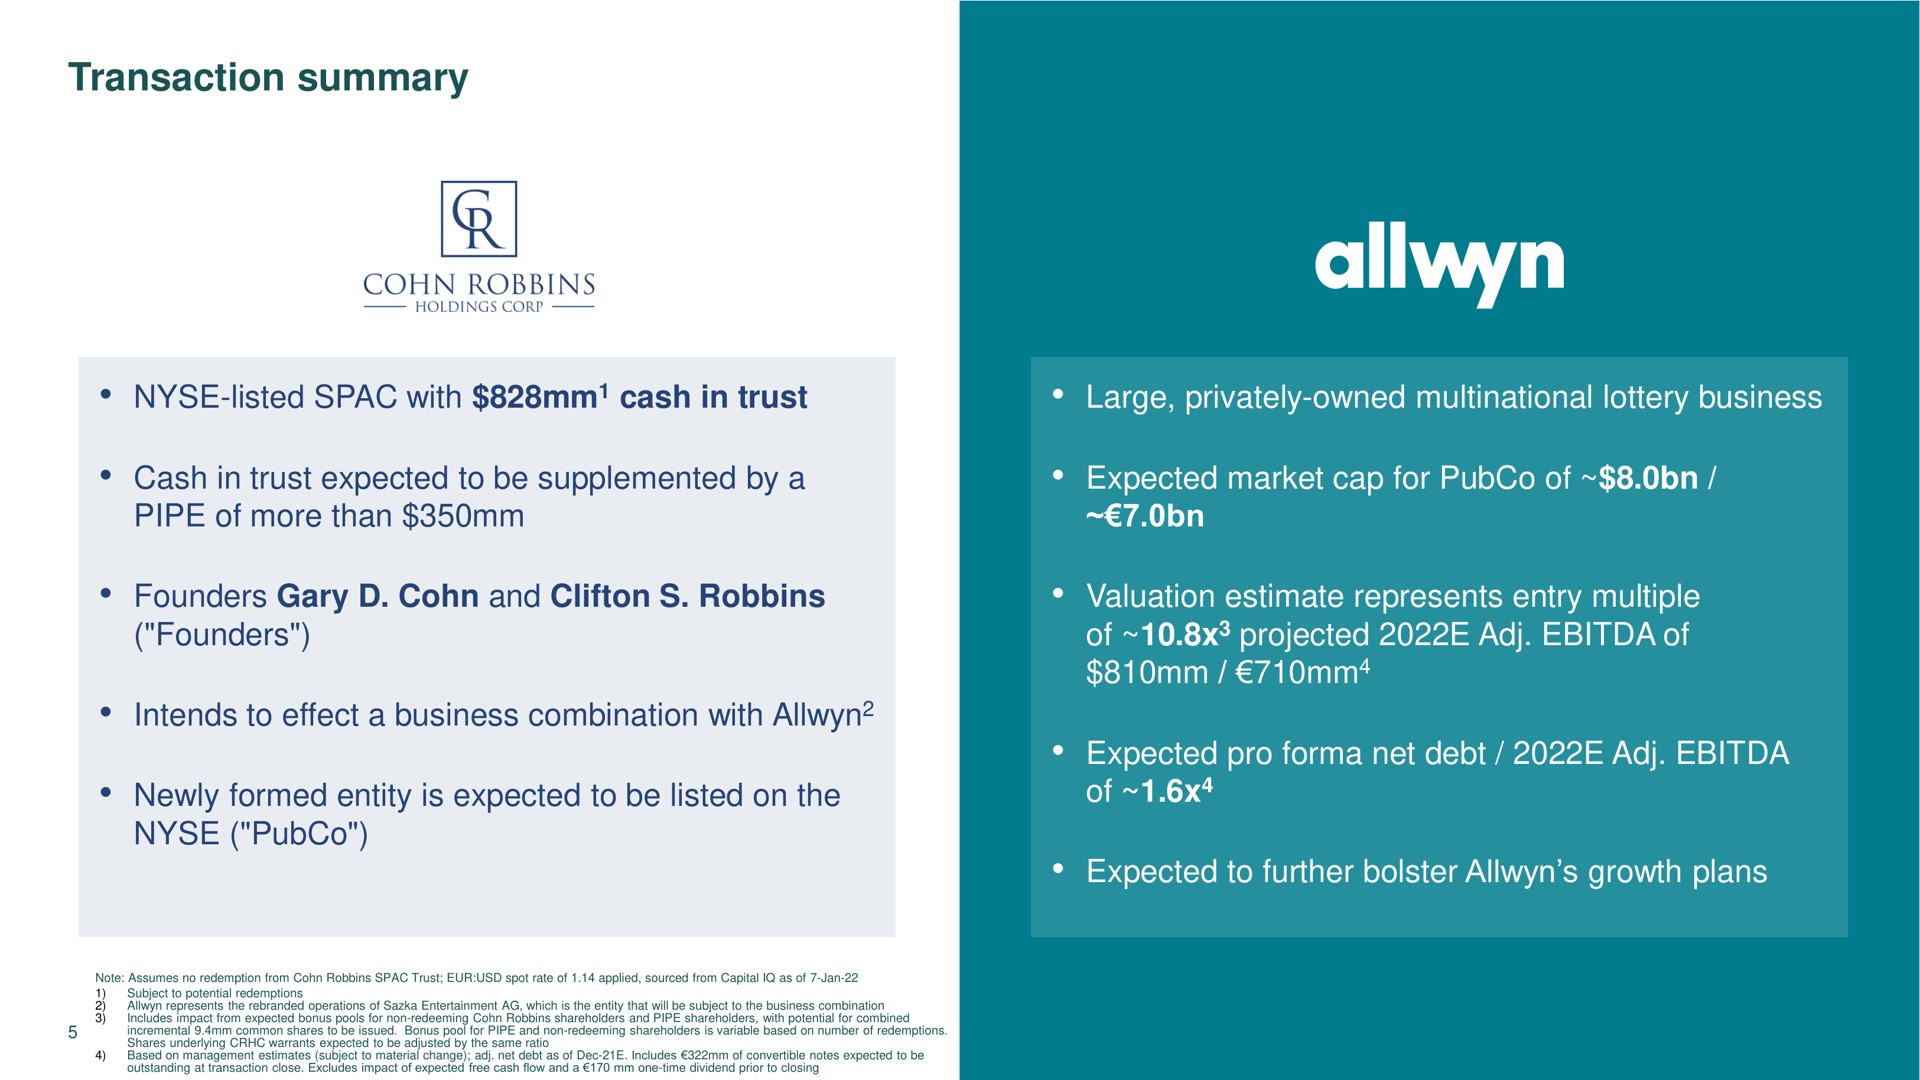 transaction summary listed with cash in trust large privately owned multinational lottery business cash in trust expected to be supplemented by a expected market cap for of pipe of more than founders and founders intends to effect a business combination with valuation estimate represents entry multiple of projected of expected pro net debt newly formed entity is expected to be listed on the of expected to further bolster growth plans | Allwyn